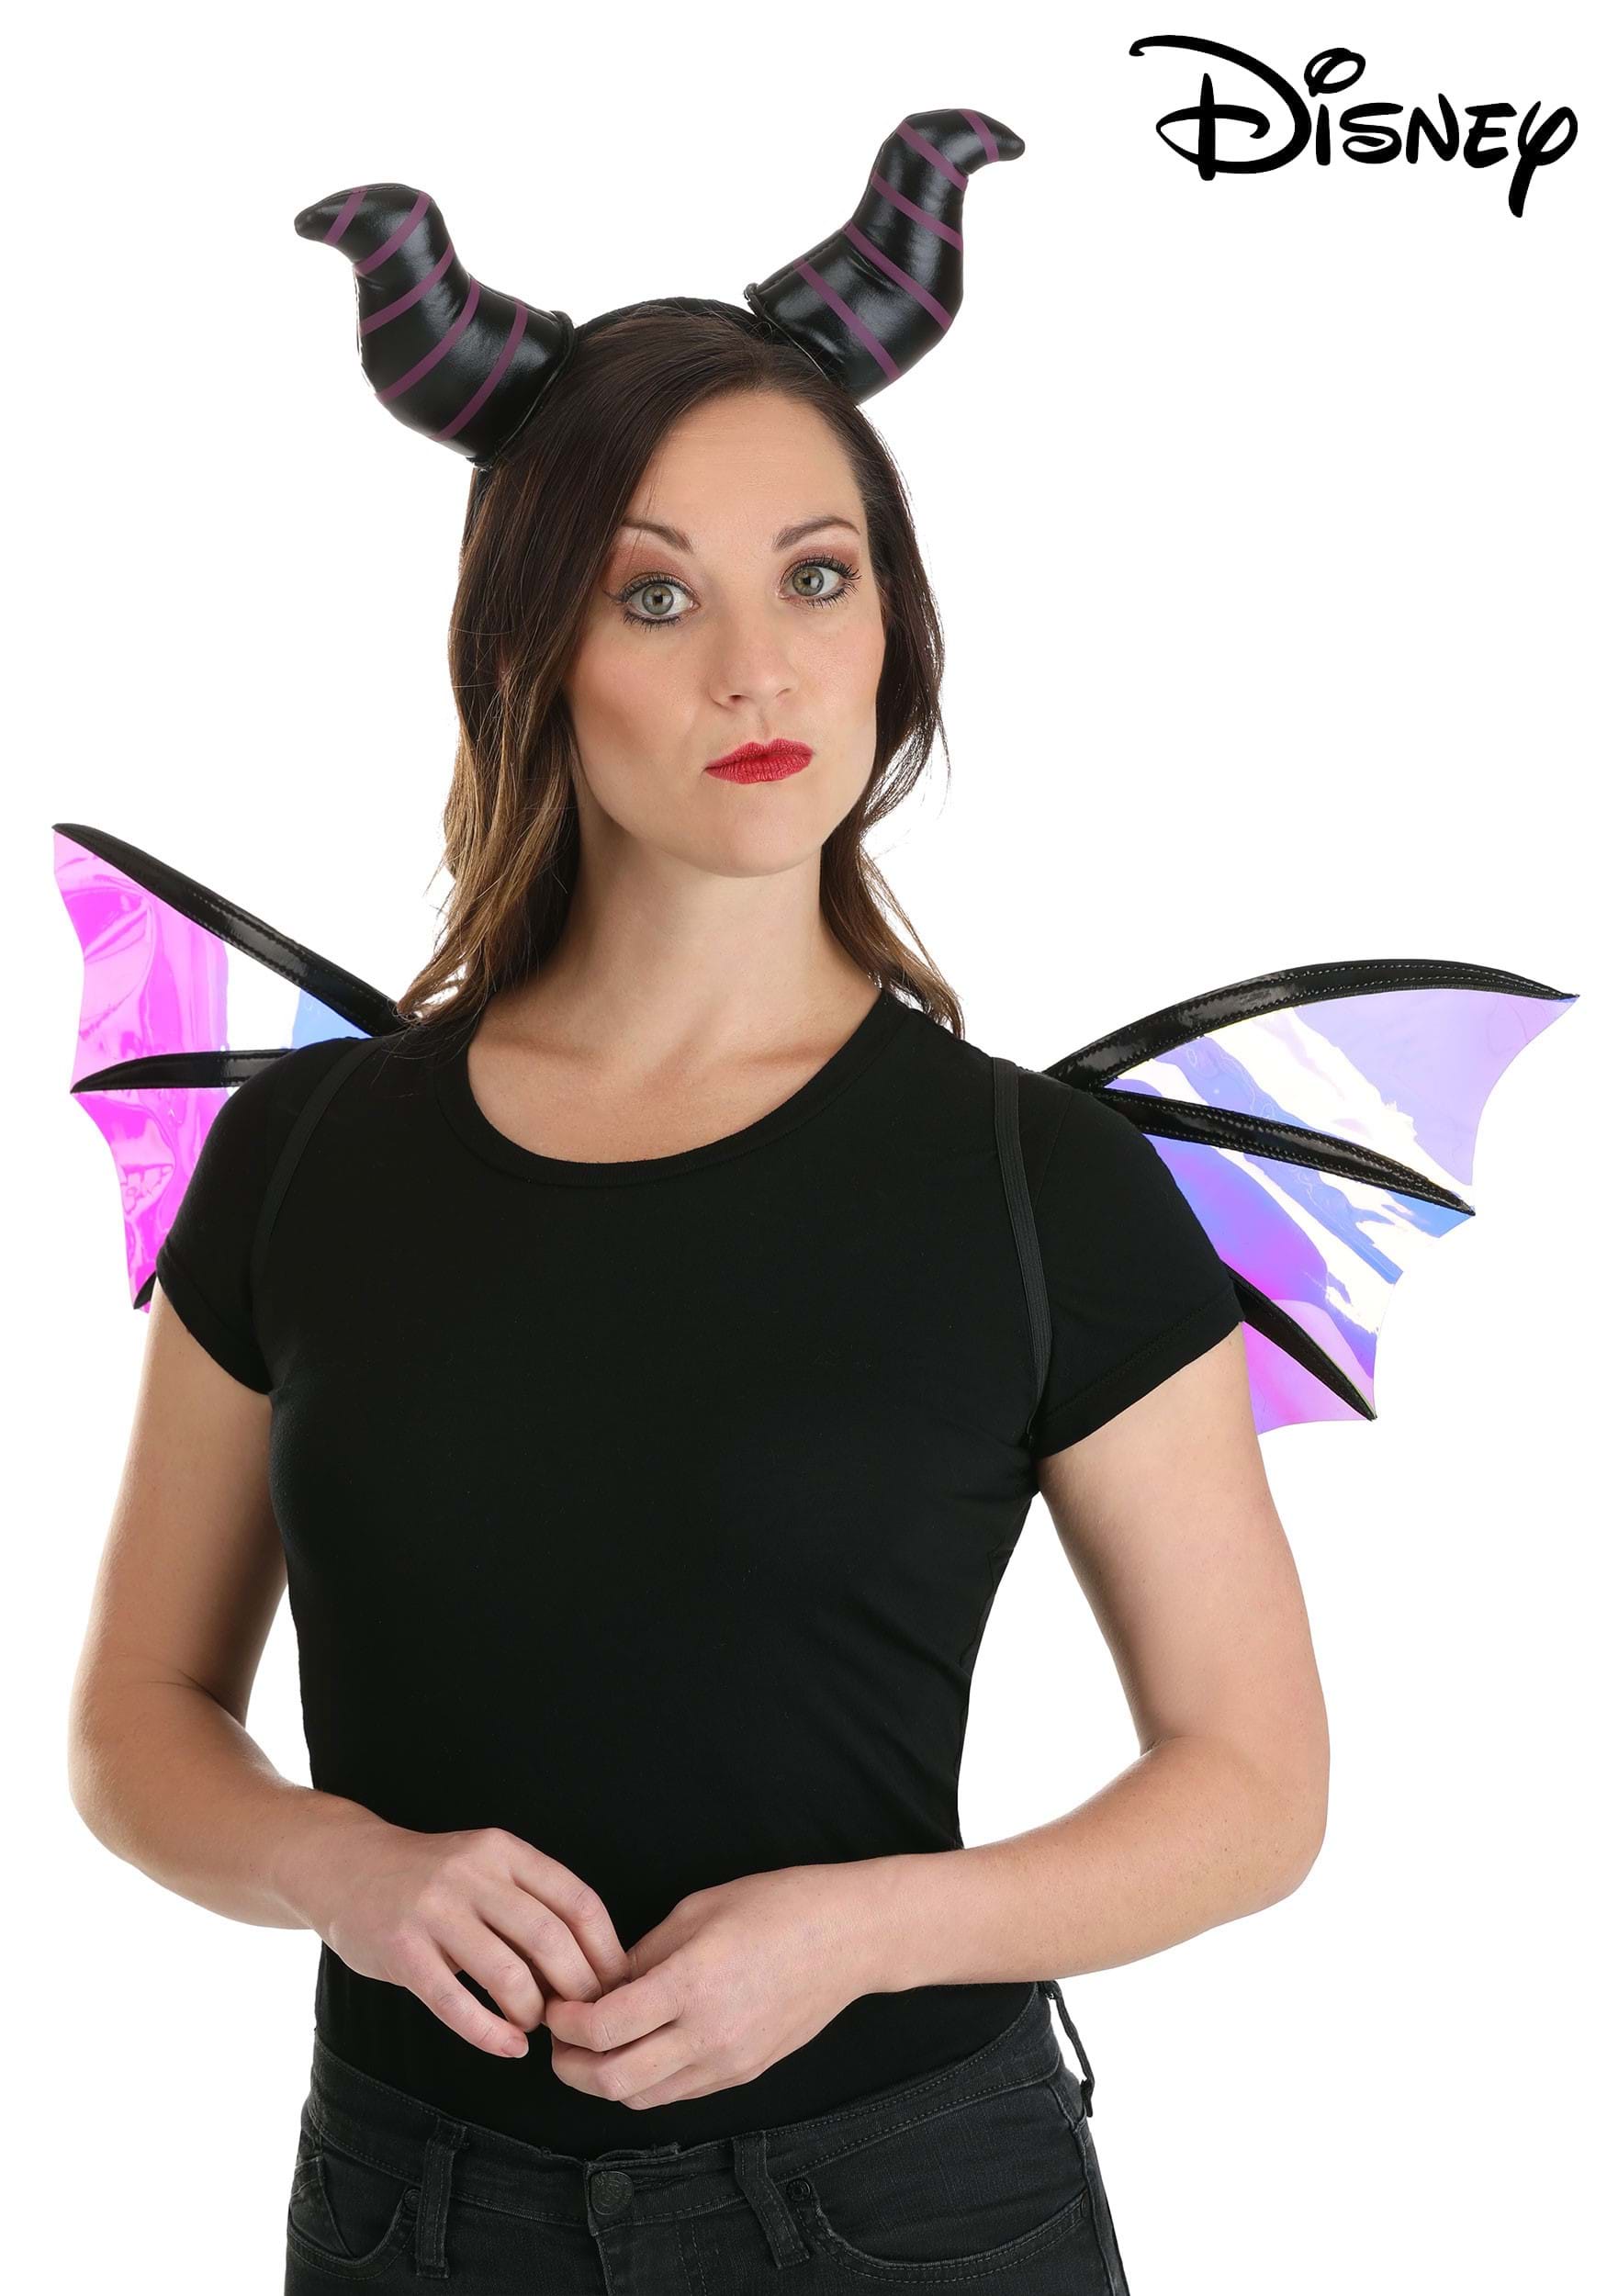 Maleficent Dragon Horns Headband and Wings Kit